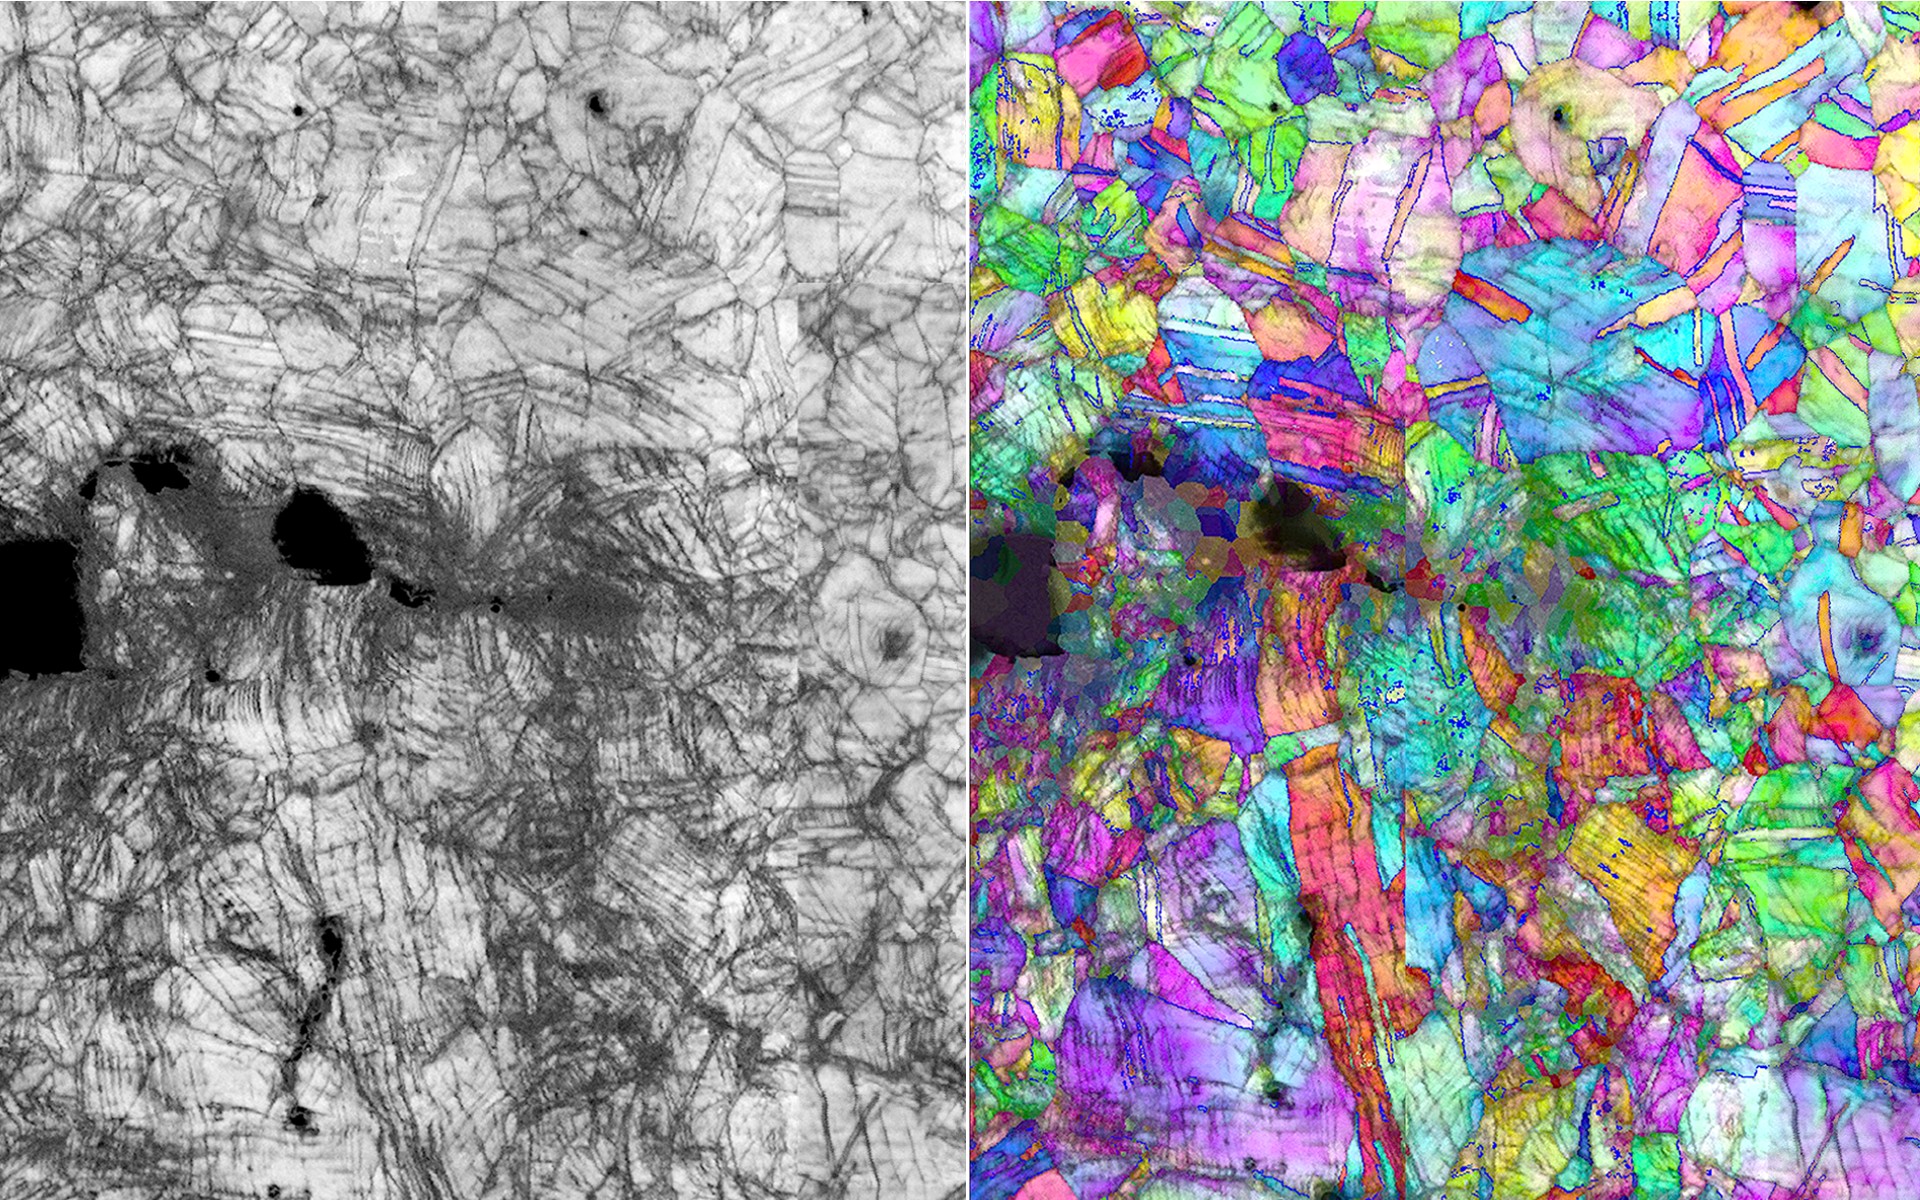 A black and white microscopy image of the material; it looks like zoomed in scratches on a hard surface on the left, then the same image in vivid multicolor on the right.